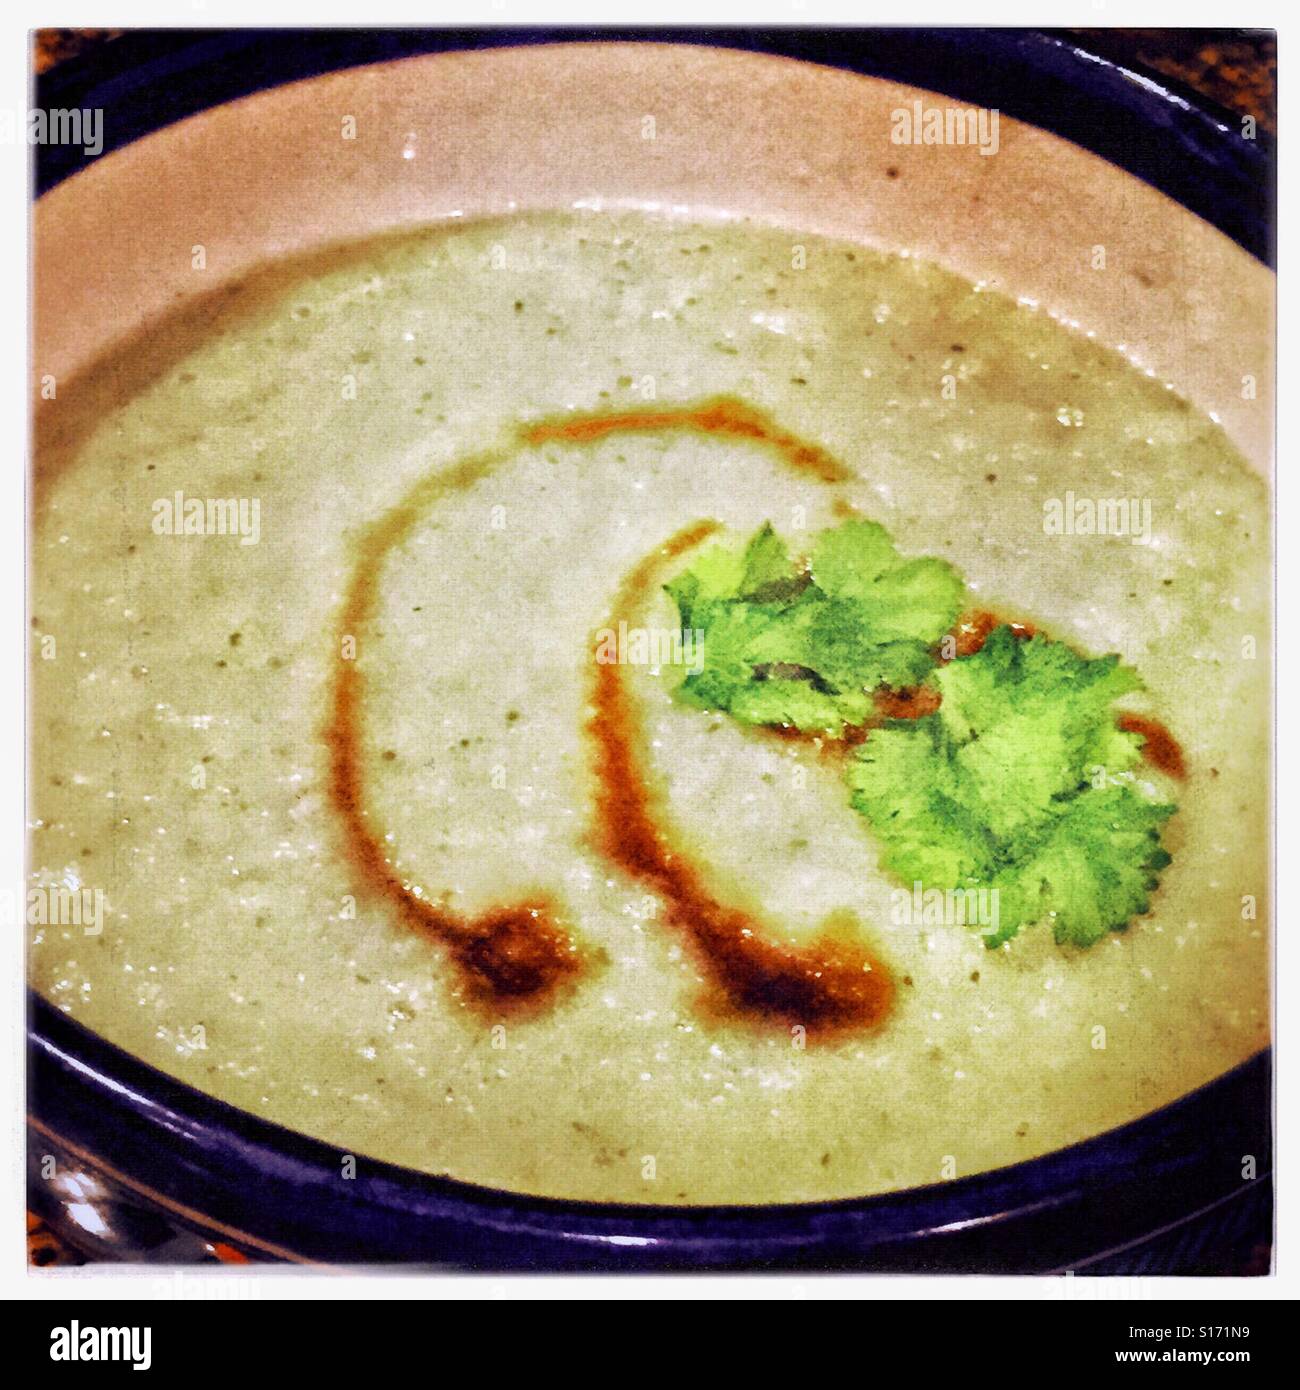 Chayote soup in a bowl garnished with a drizzle of smoky sweet chipotle sauce and cilantro leaves. Stock Photo